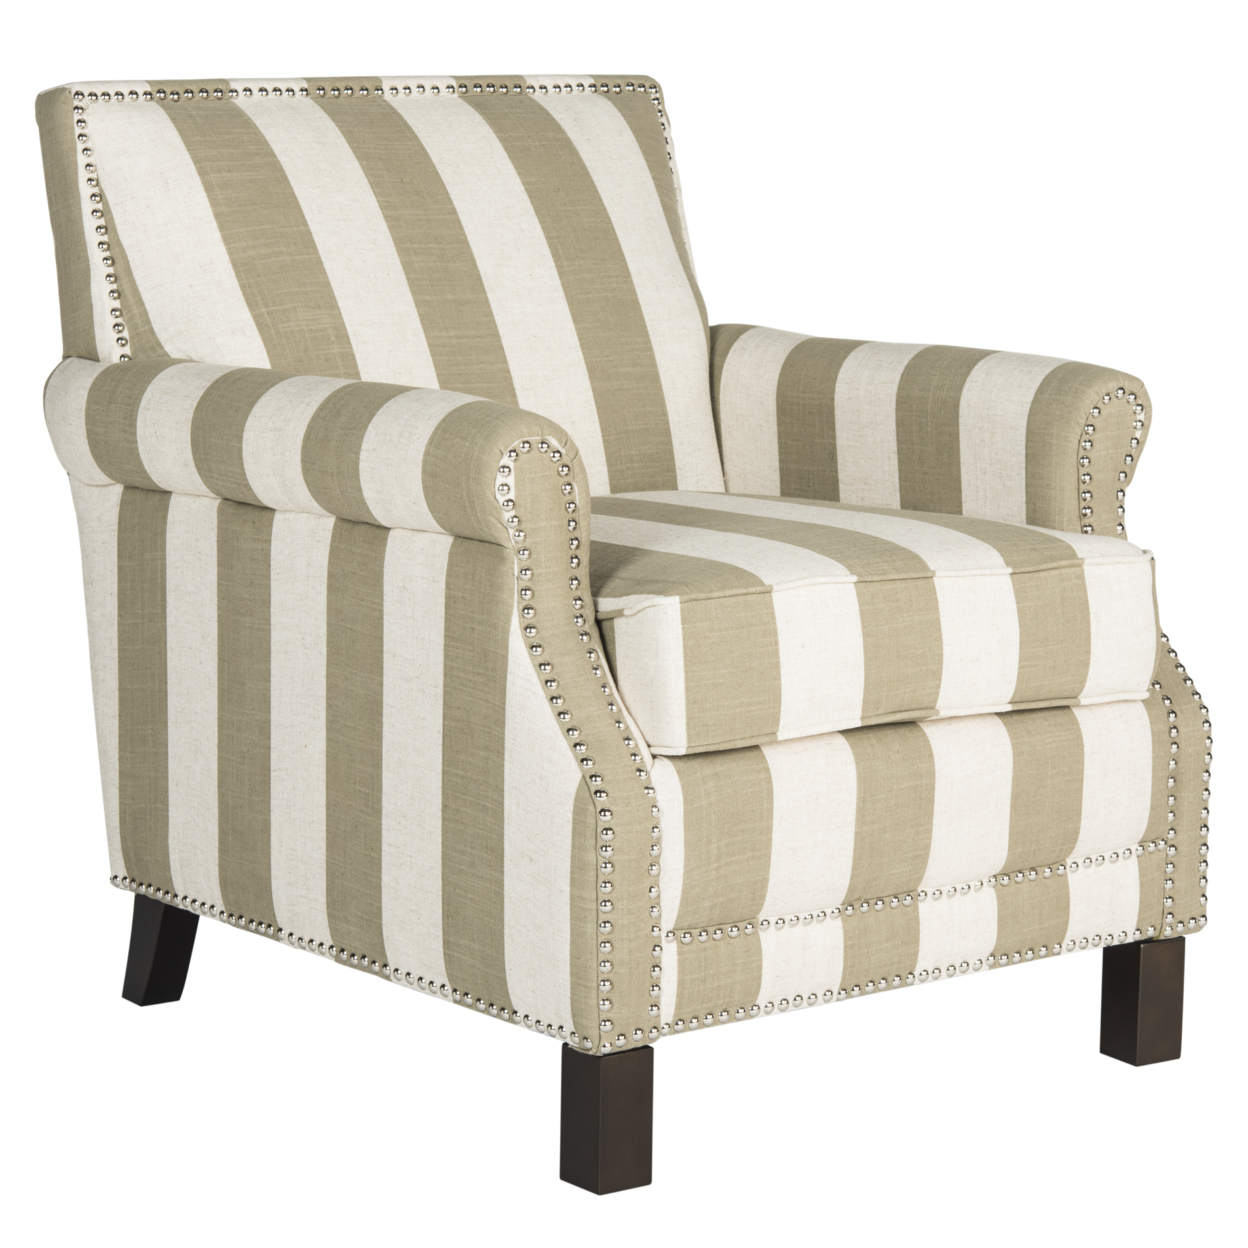 SAFAVIEH Easton Rustic Glam Upholstered Club Chair w/ Nailheads, Olive/White - image 3 of 7